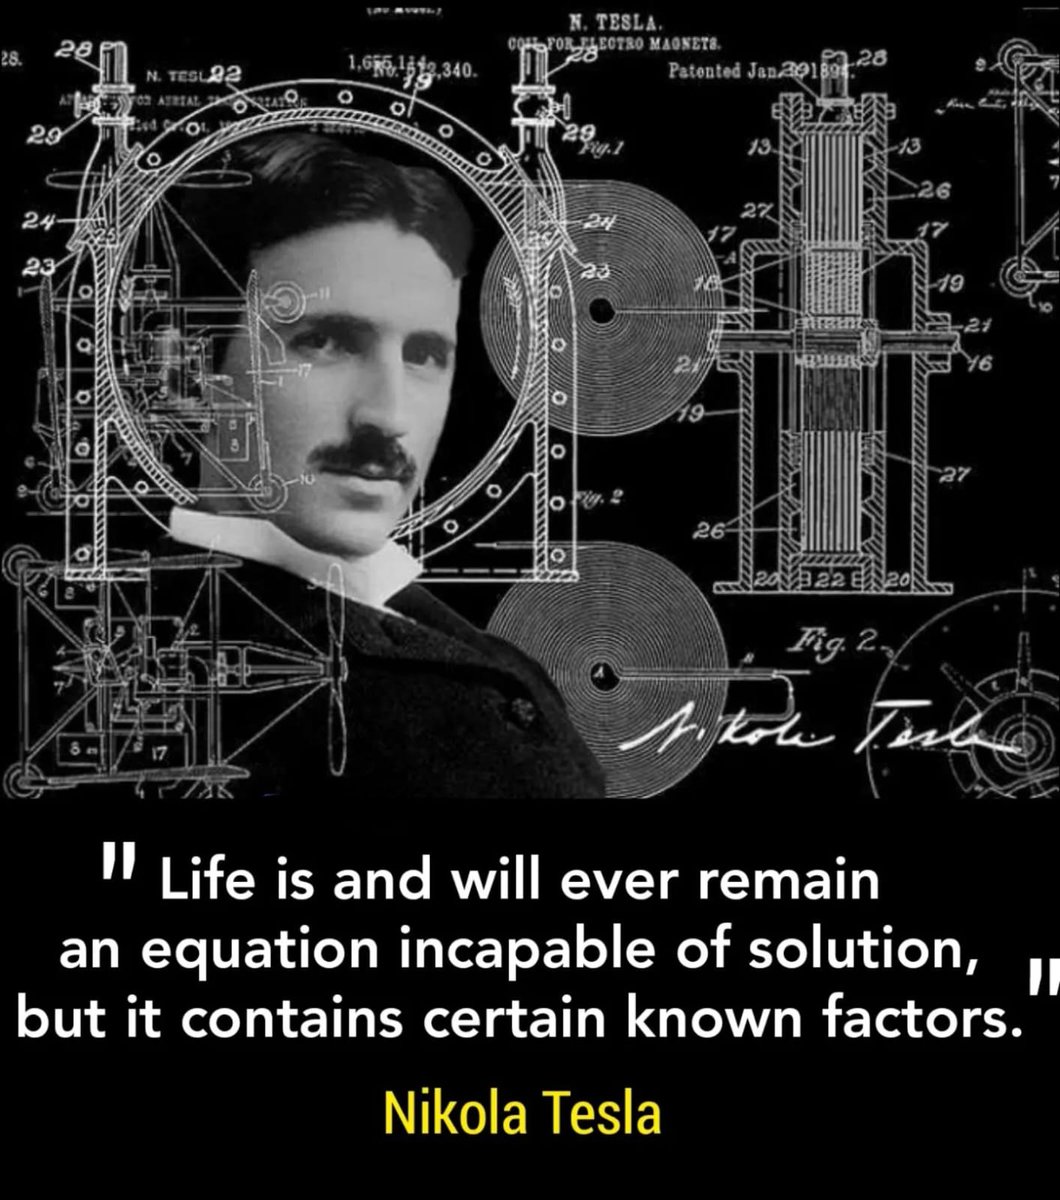 ❤️ - Nikola Tesla 

#quotes #love #motivation #life #quoteoftheday #instagram #inspiration #motivationalquotes #instagood #quote #follow #inspirationalquotes #like #success #bhfyp #positivevibes #lovequotes #poetry #quotestagram #happiness #selflove #loveyourself #lifestyle